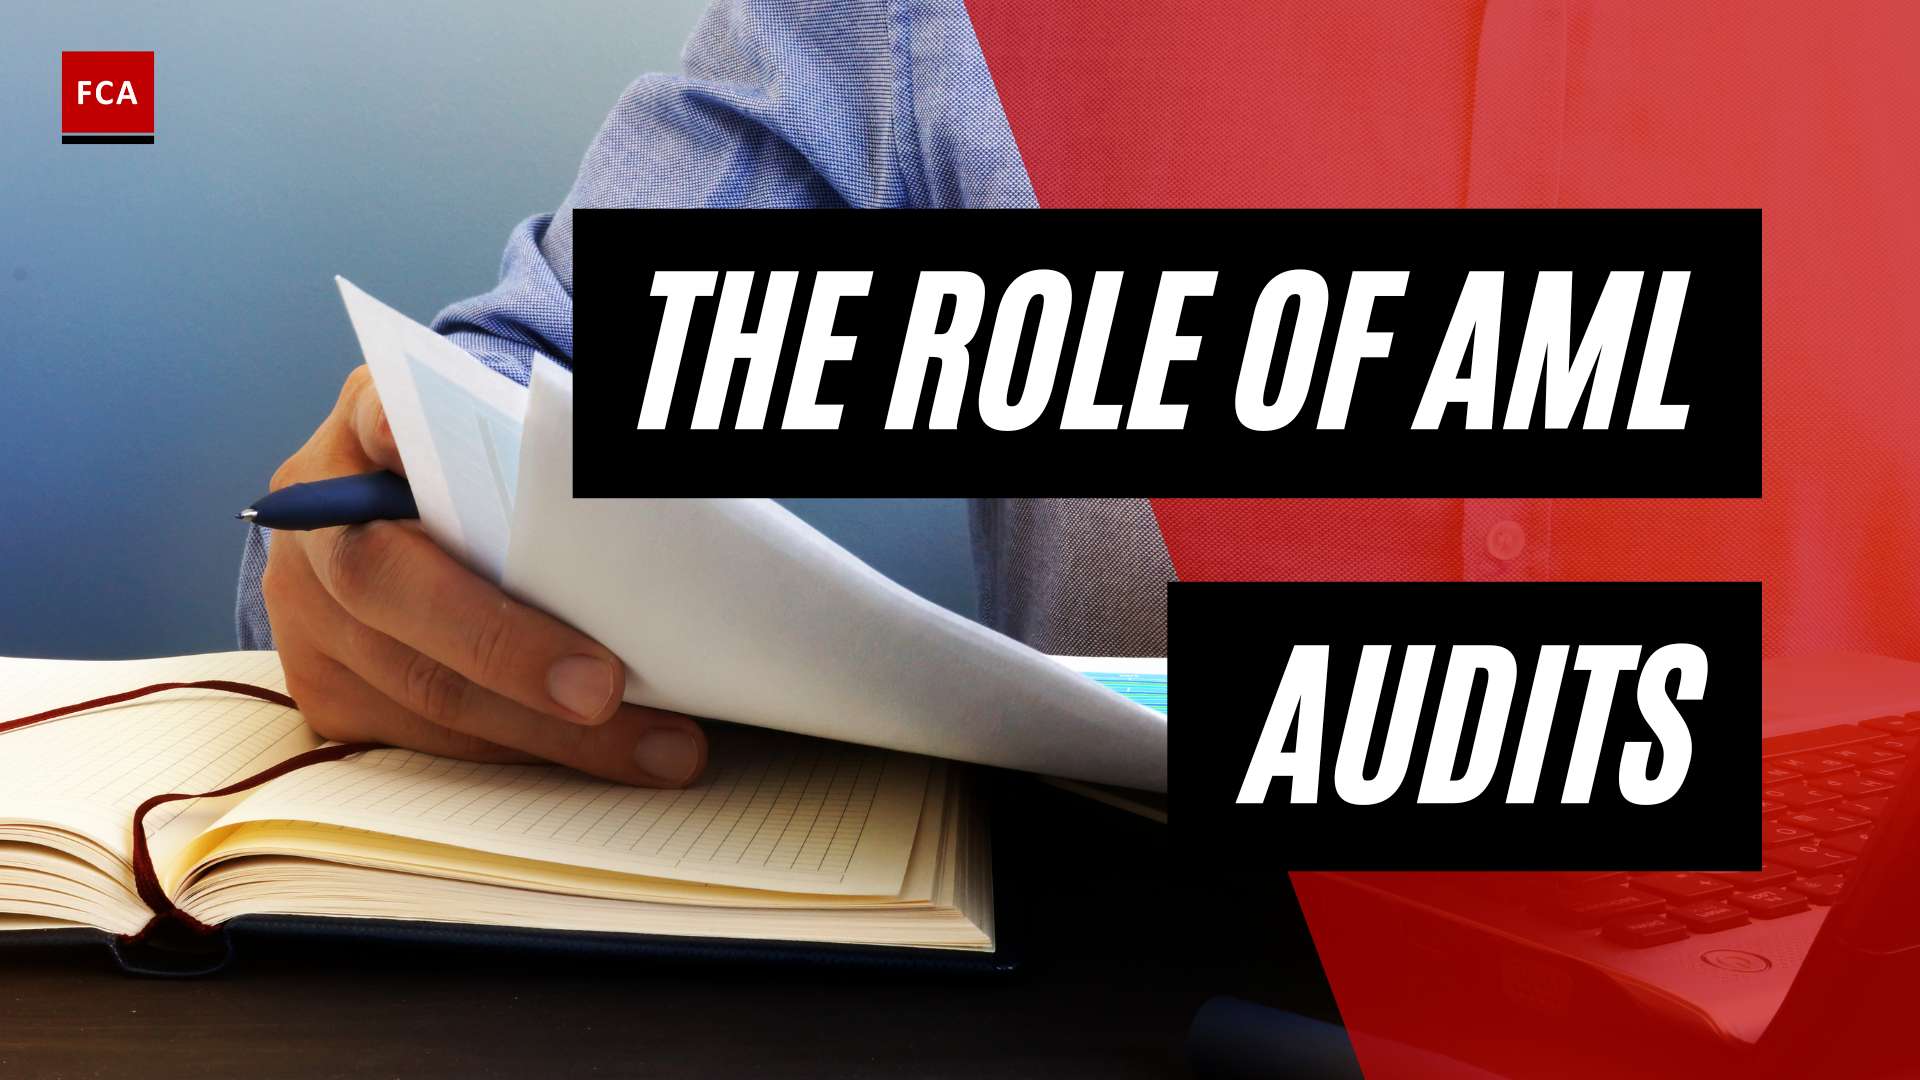 Ensuring Transparency: The Role Of Aml Compliance Audits